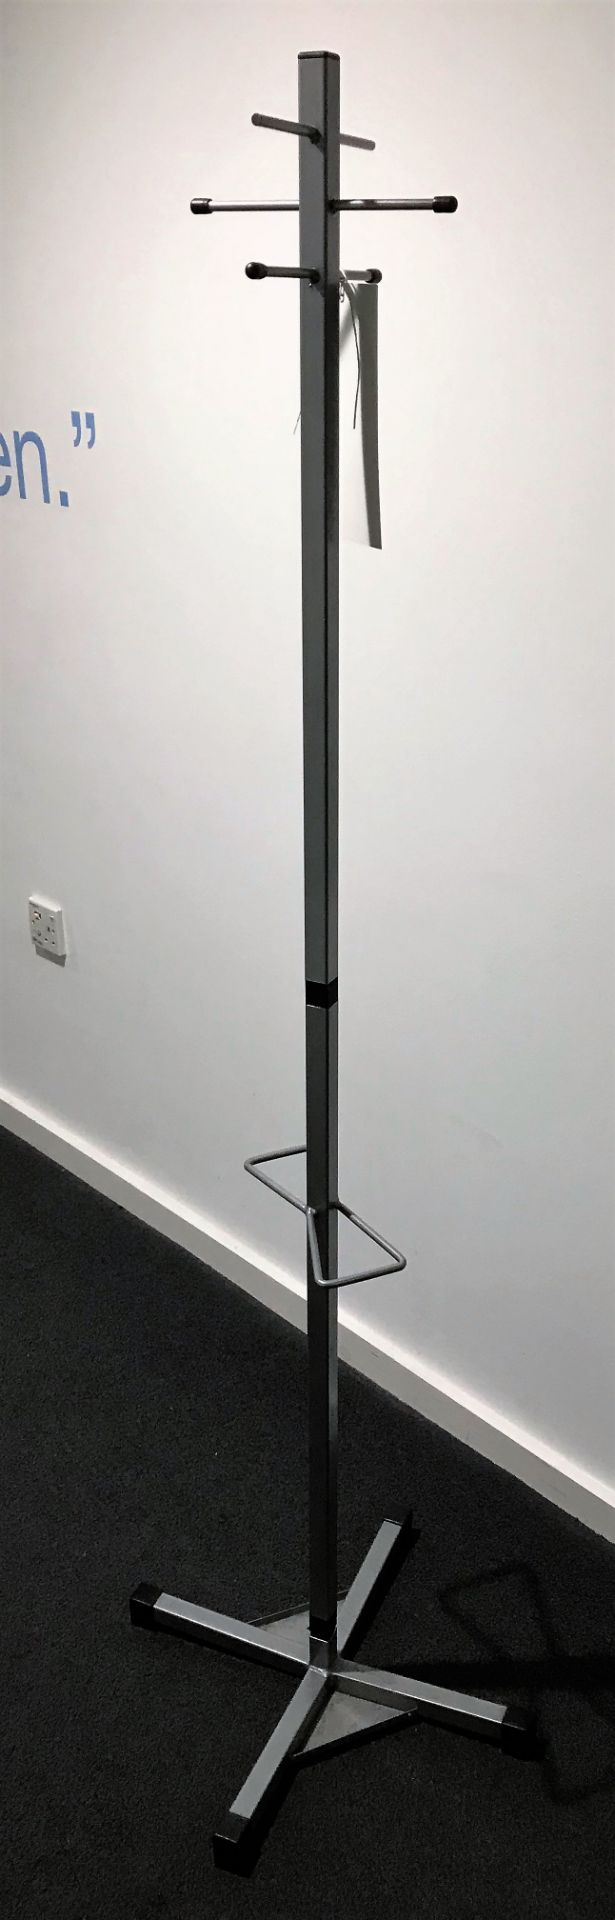 3 Steel Hat and Coat Stands